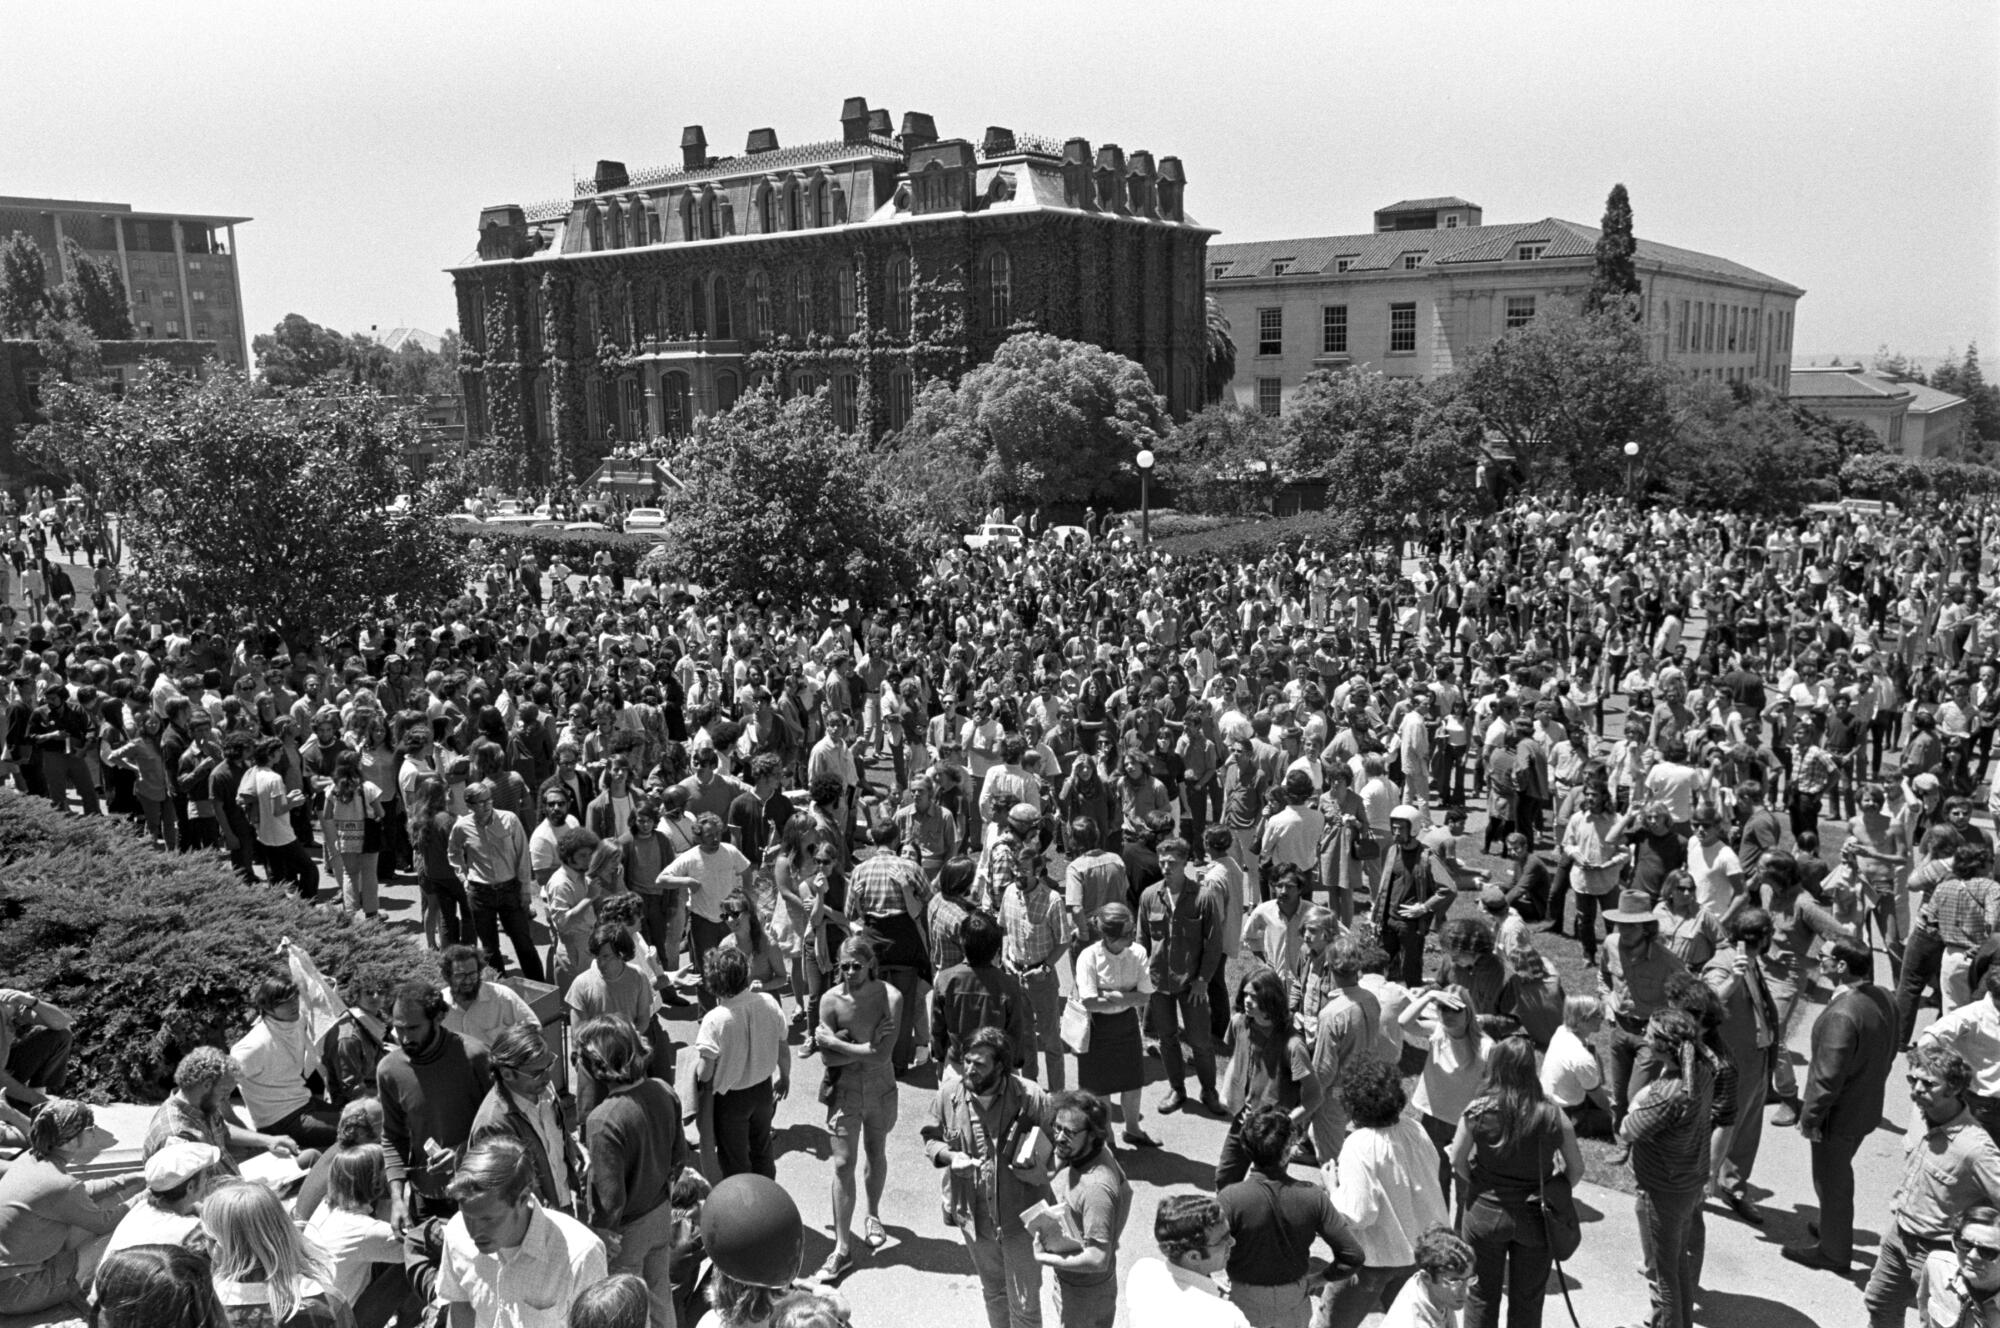 Elevated view of students and activists assembled in Sproul Plaza on the campus of UC Berkeley.